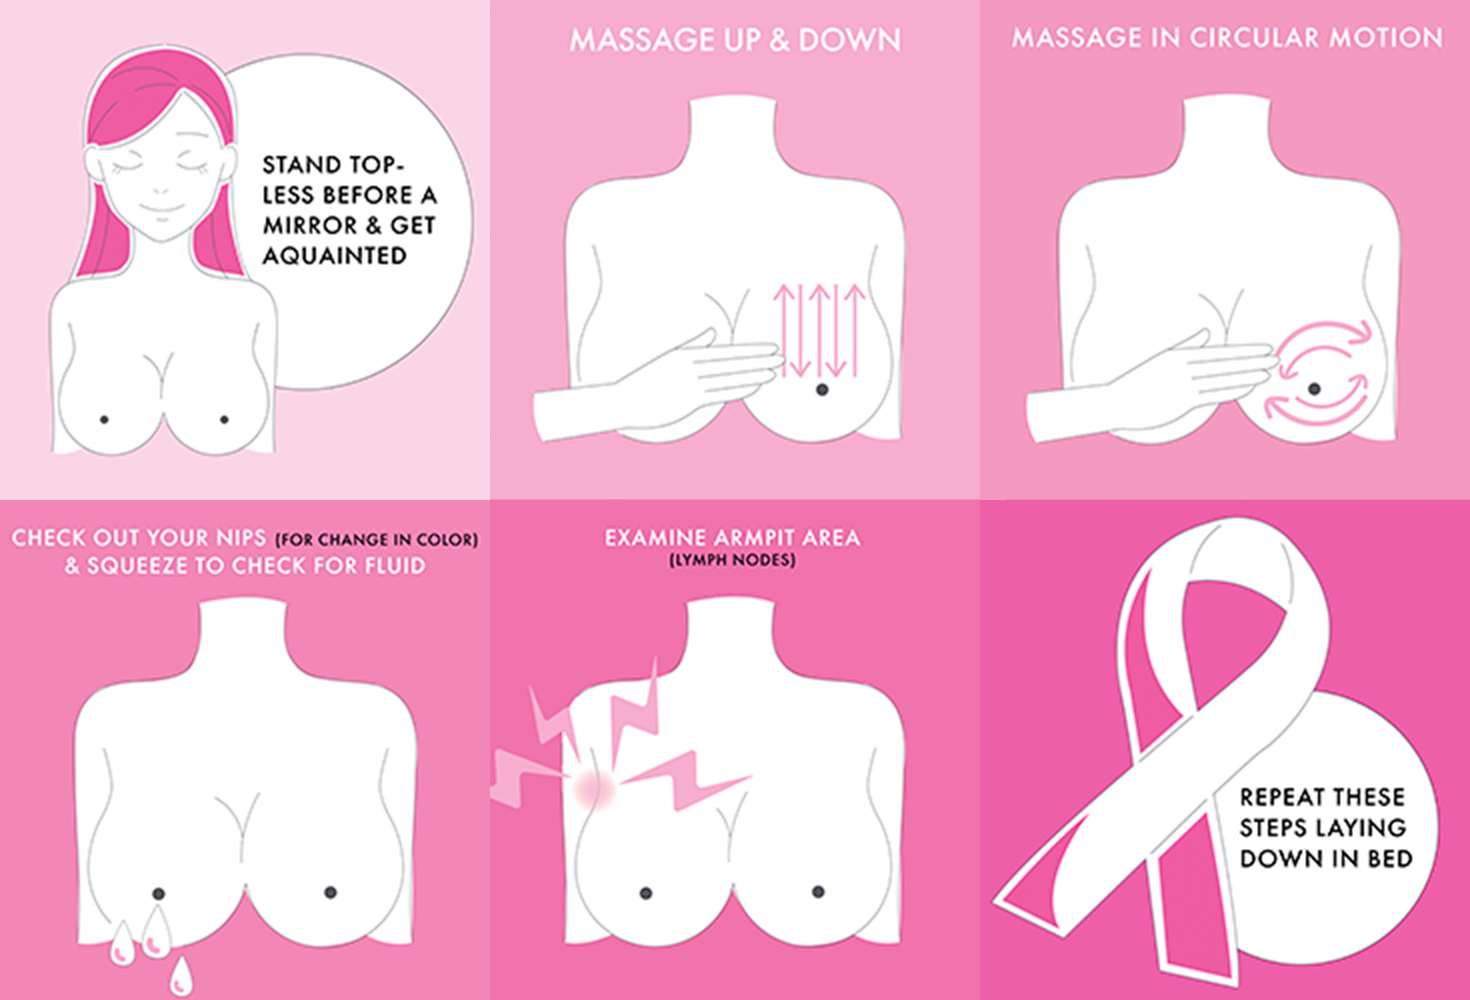 Self examination how-to check for breast cancer.